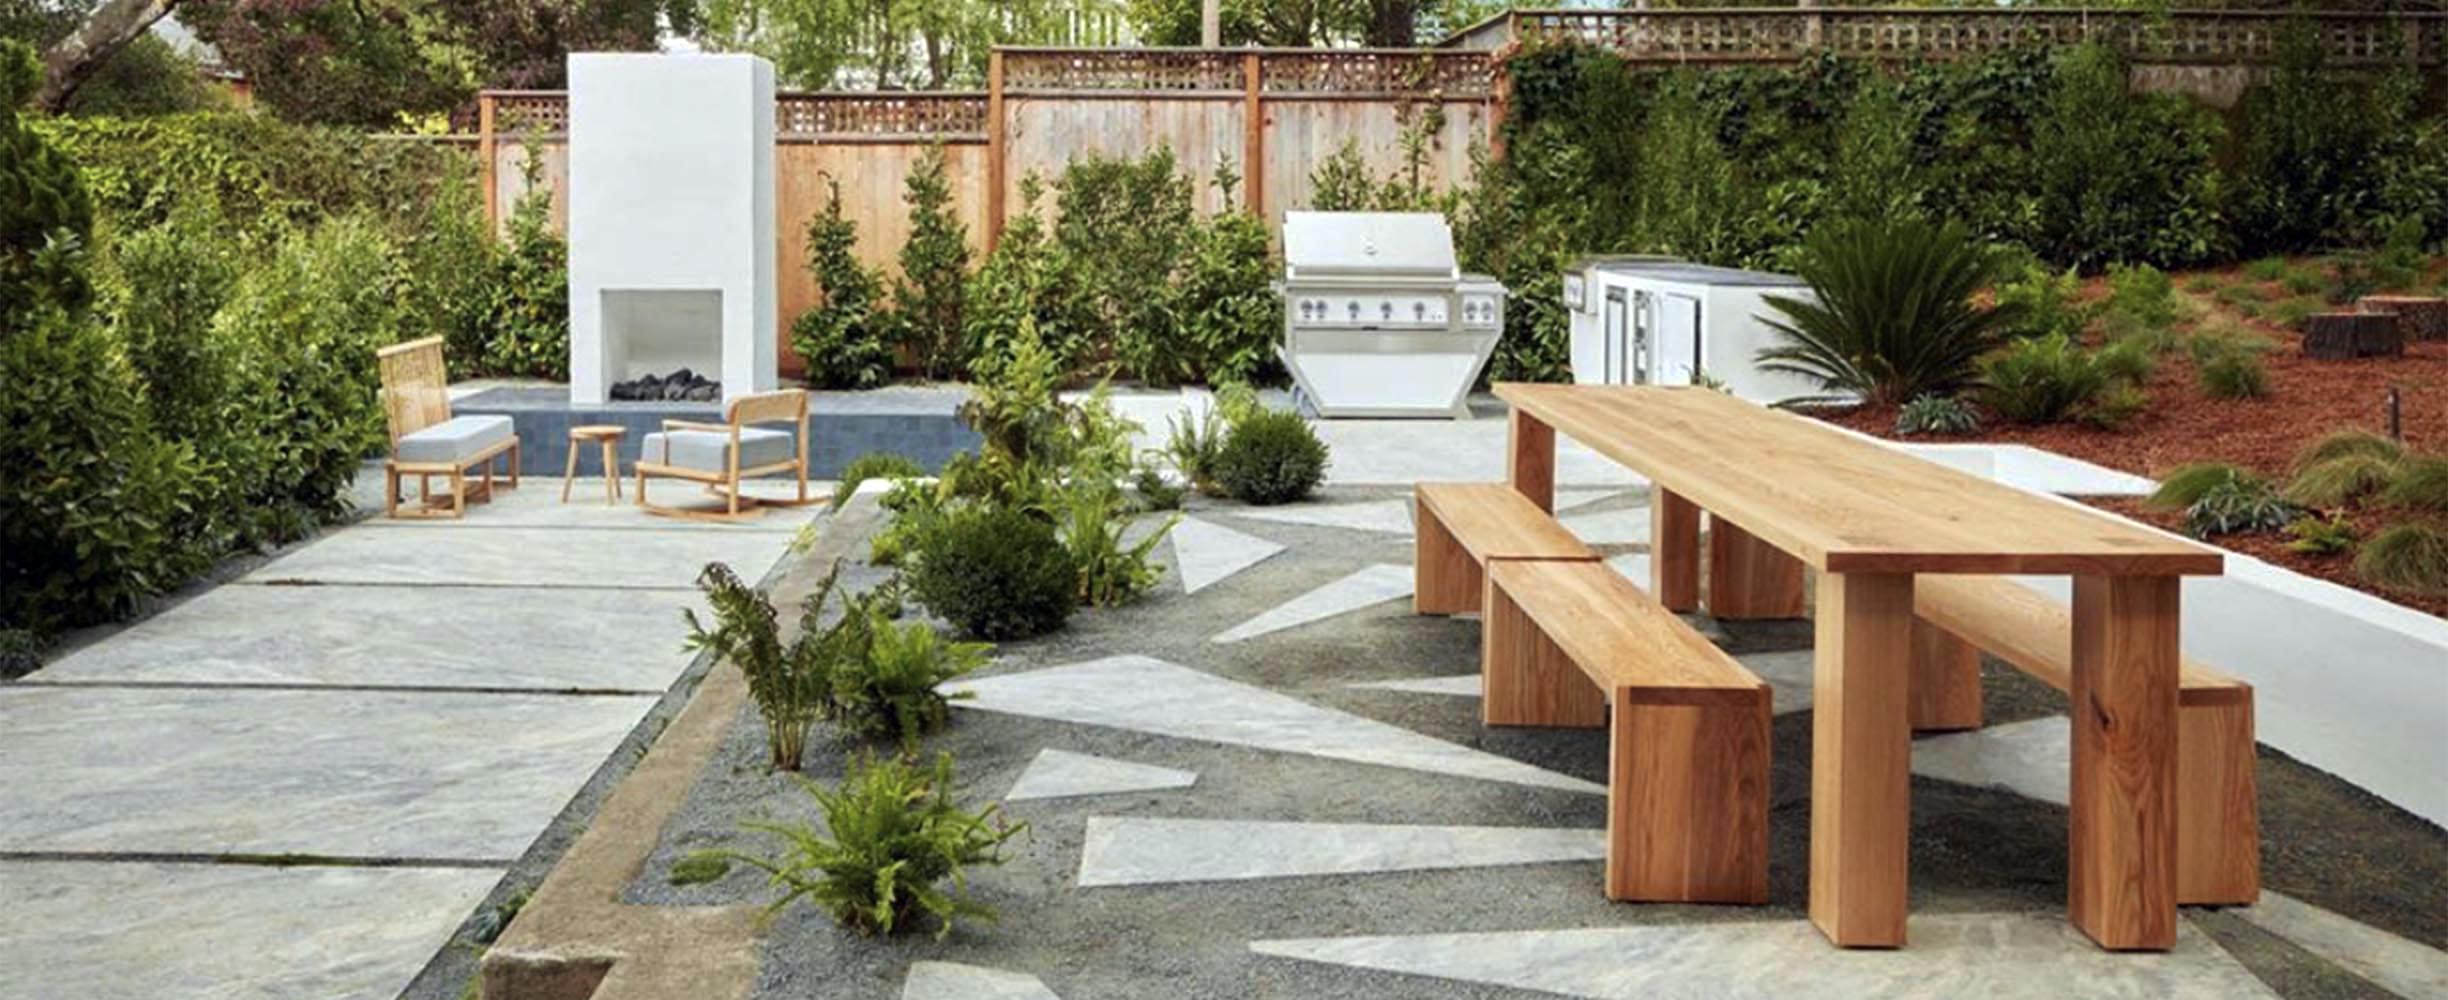 Landscaping in San Francisco, patio with grill, tables and fireplace.